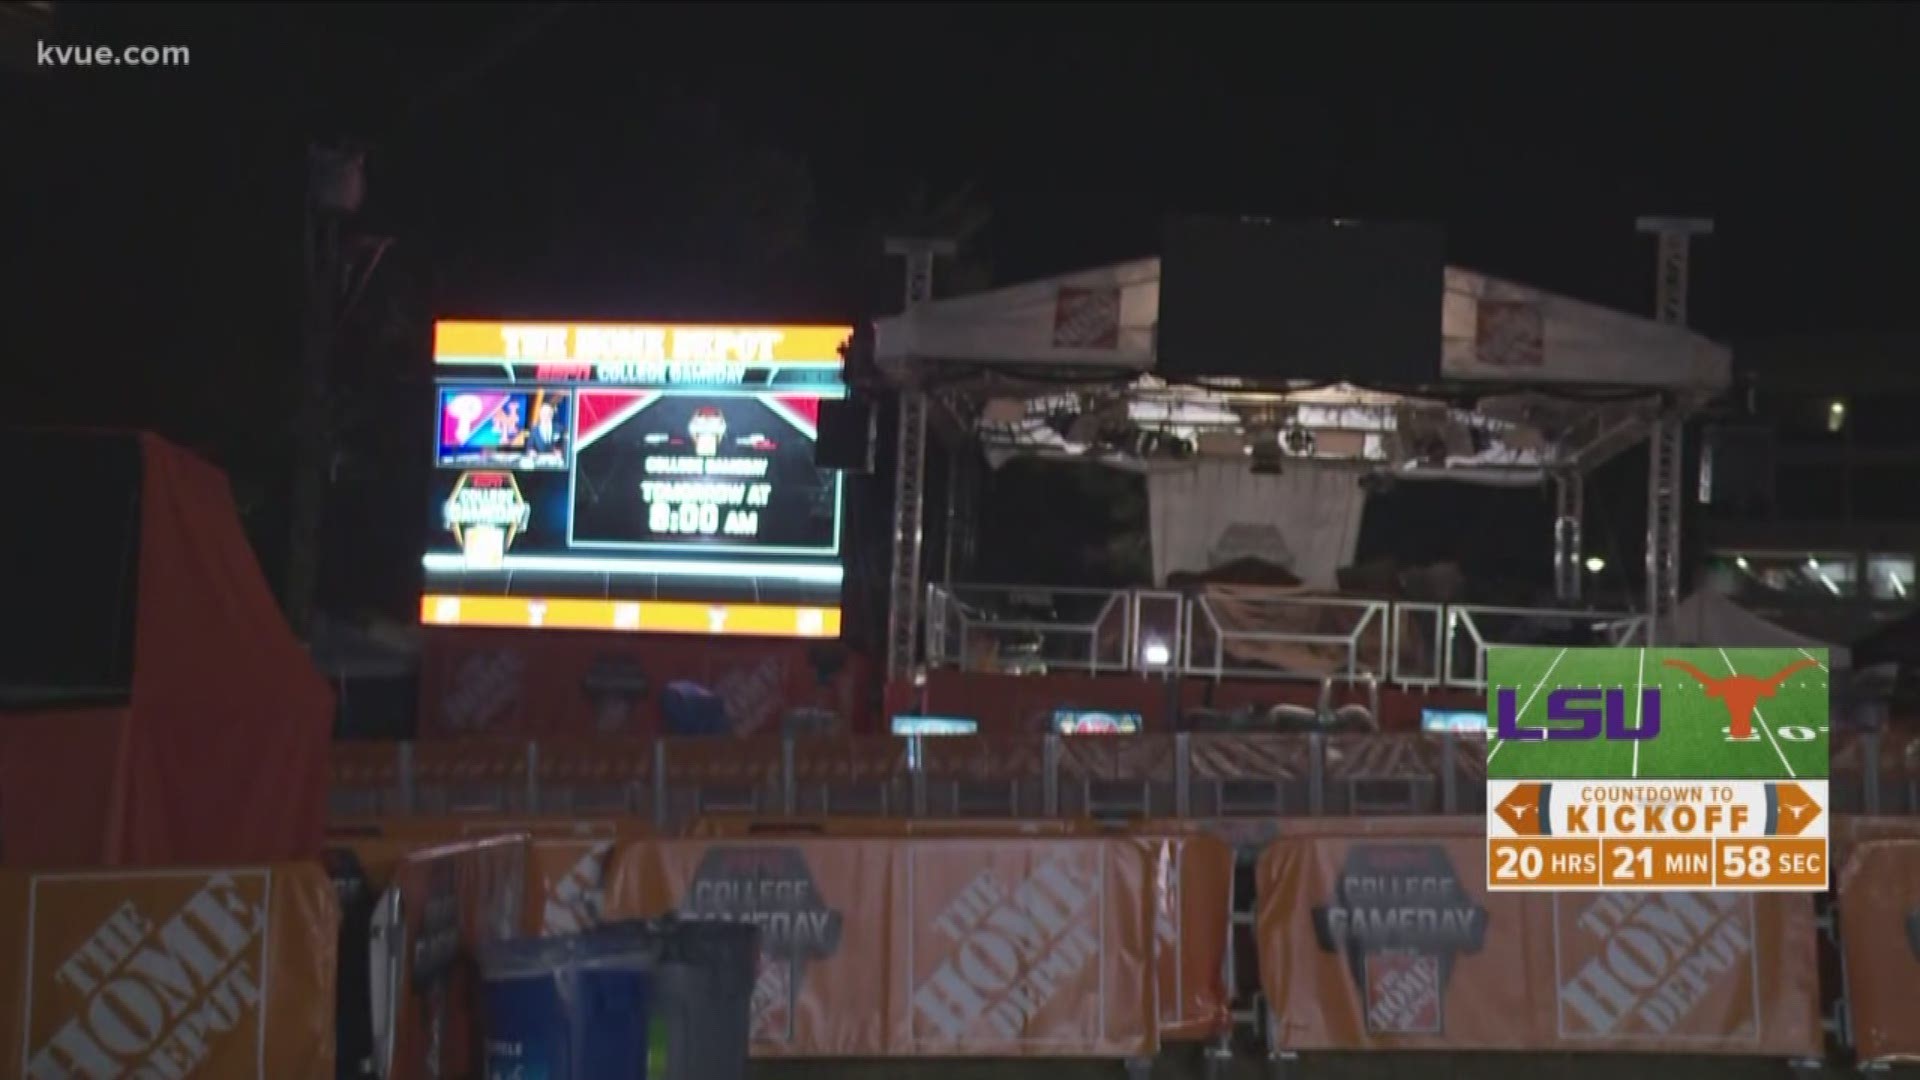 ESPN is setting up shop in Austin to cover the biggest college football game of the weekend.